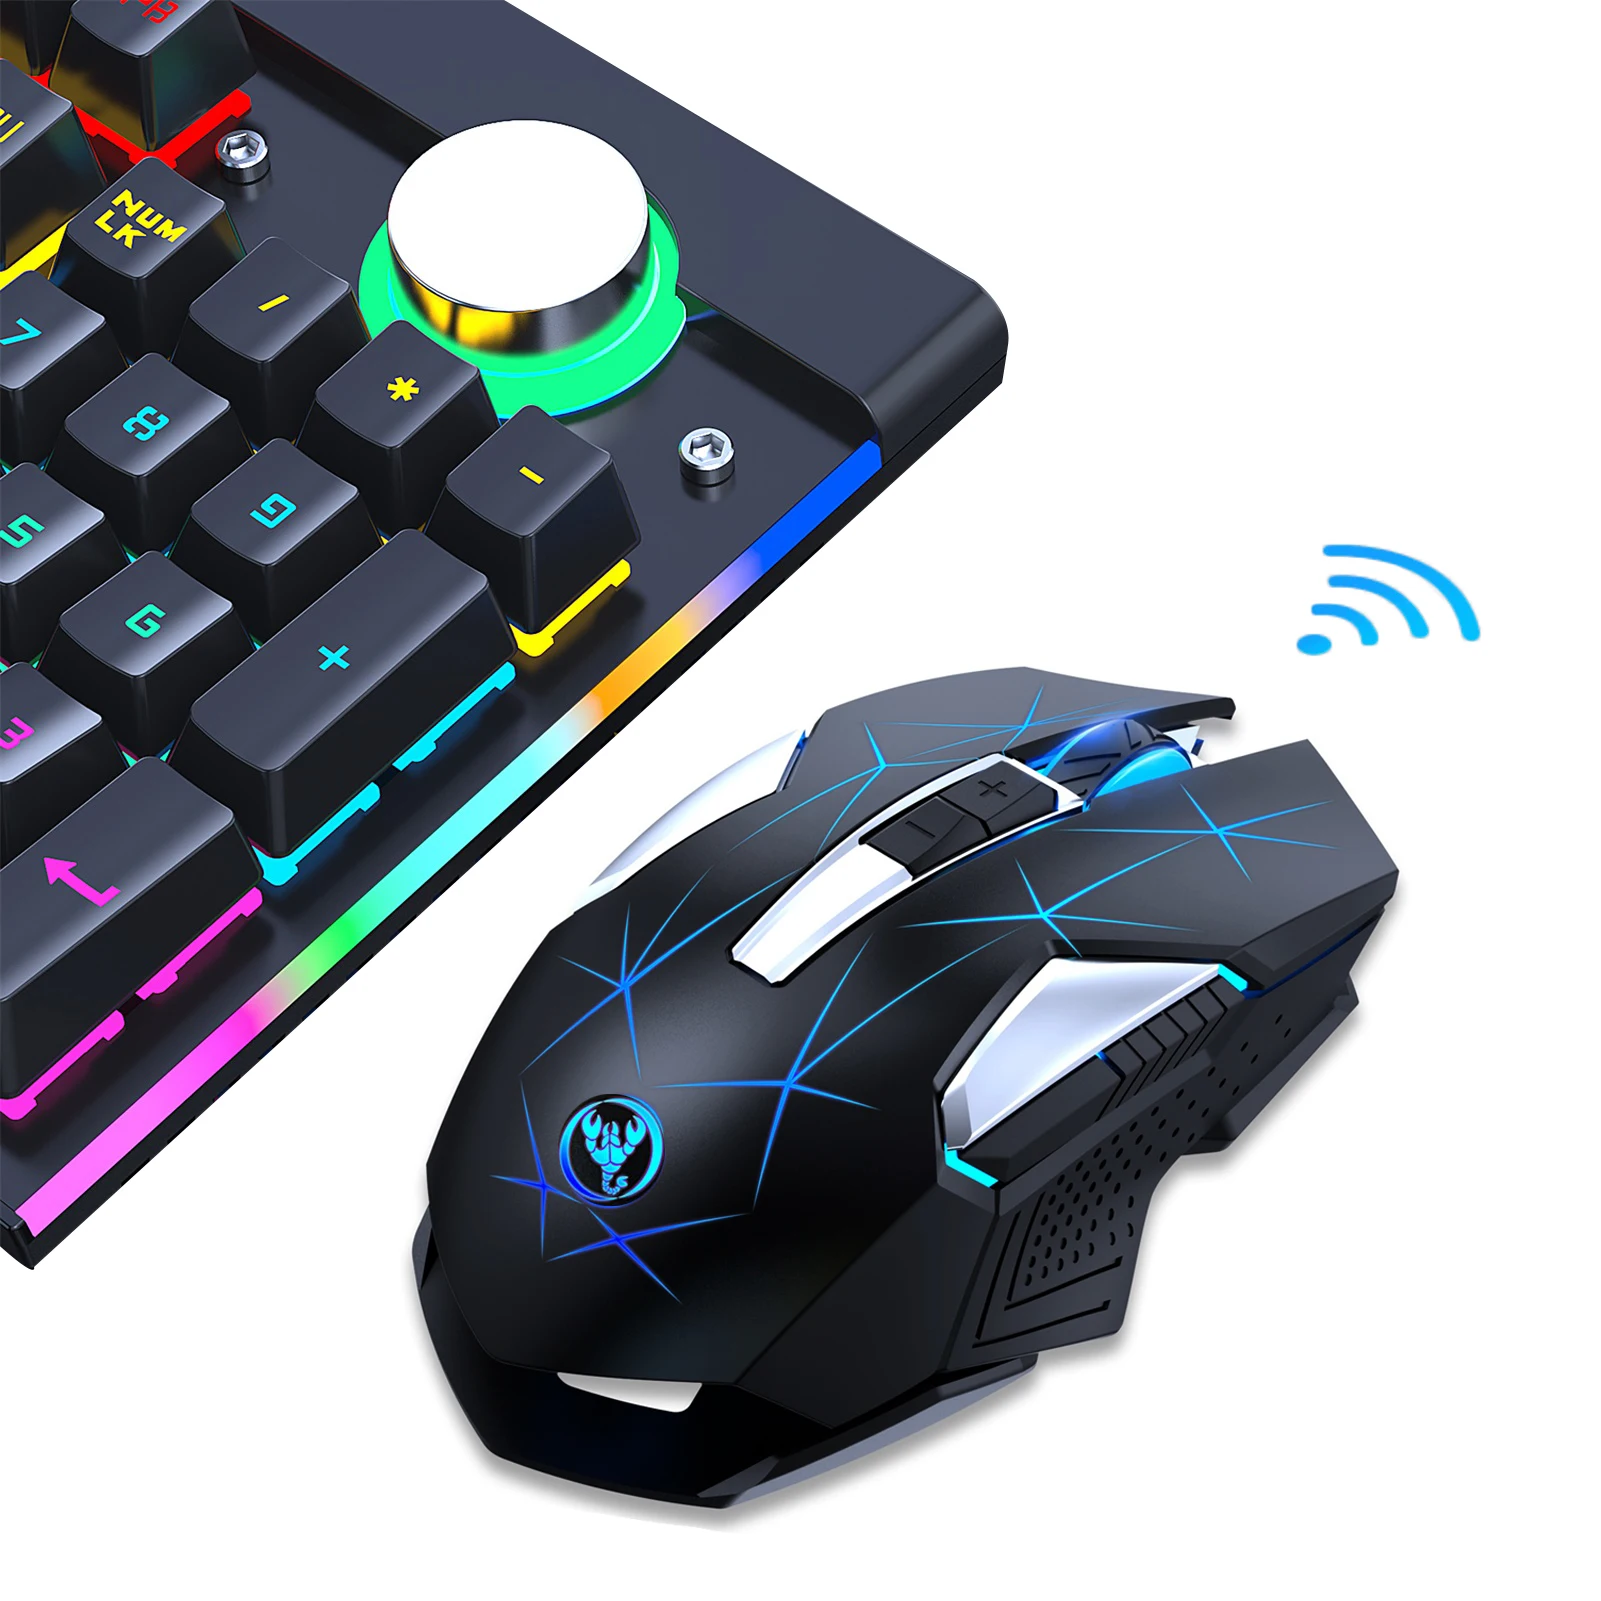 

Wireless Light Up Mouse USB OpticalMice 7 Programmable Buttons Optical Gamer Mice 1000/1600/2400 DPI Gamer Mice For